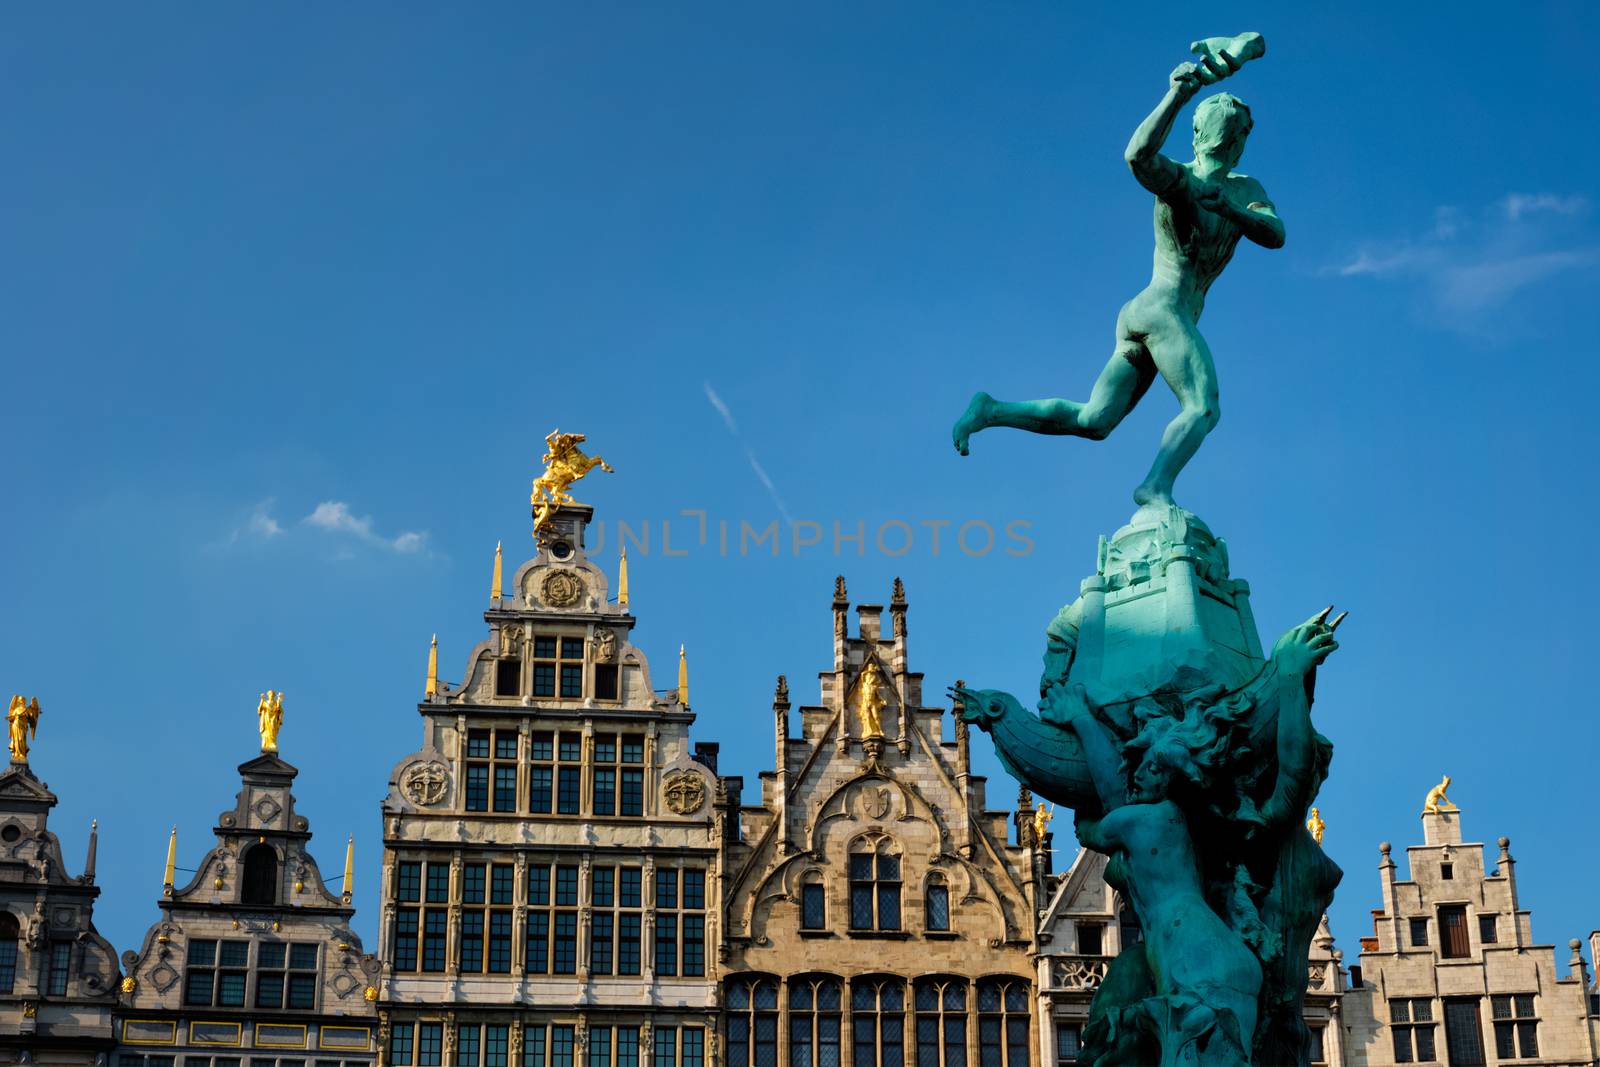 Antwerp 16th century old houses Monumental Guildhouses facades on Grote Markt square and Antwerp famous Brabo statue and fountain on Grote Markt square. Antwerp, Belgium, Flanders